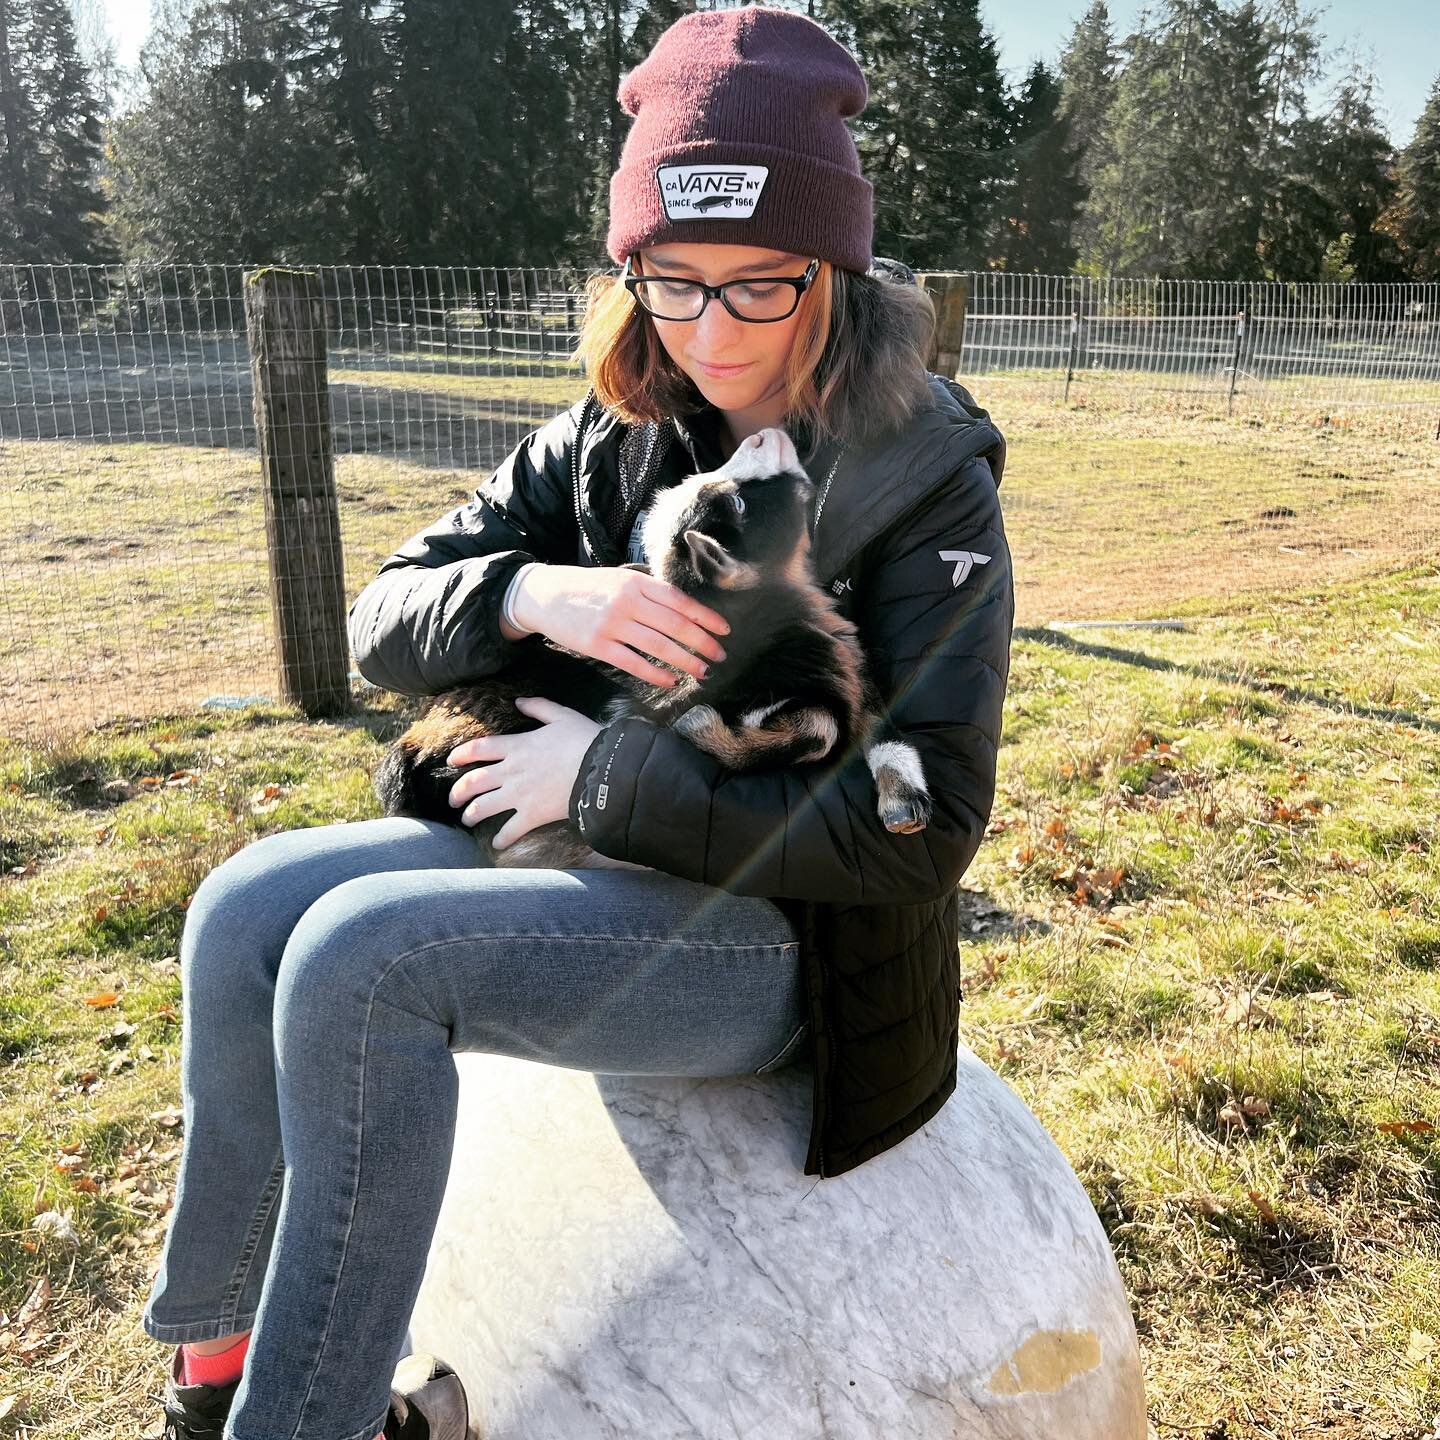 Thanks to some awesome teenagers who volunteer at @oregonhumane we were able to meet up for Donuts with Donkeys on the farm! (With baby goats, chickens and a pig 🐷💕Always so fulfilling to share the farm with the young kind-hearted 🥰